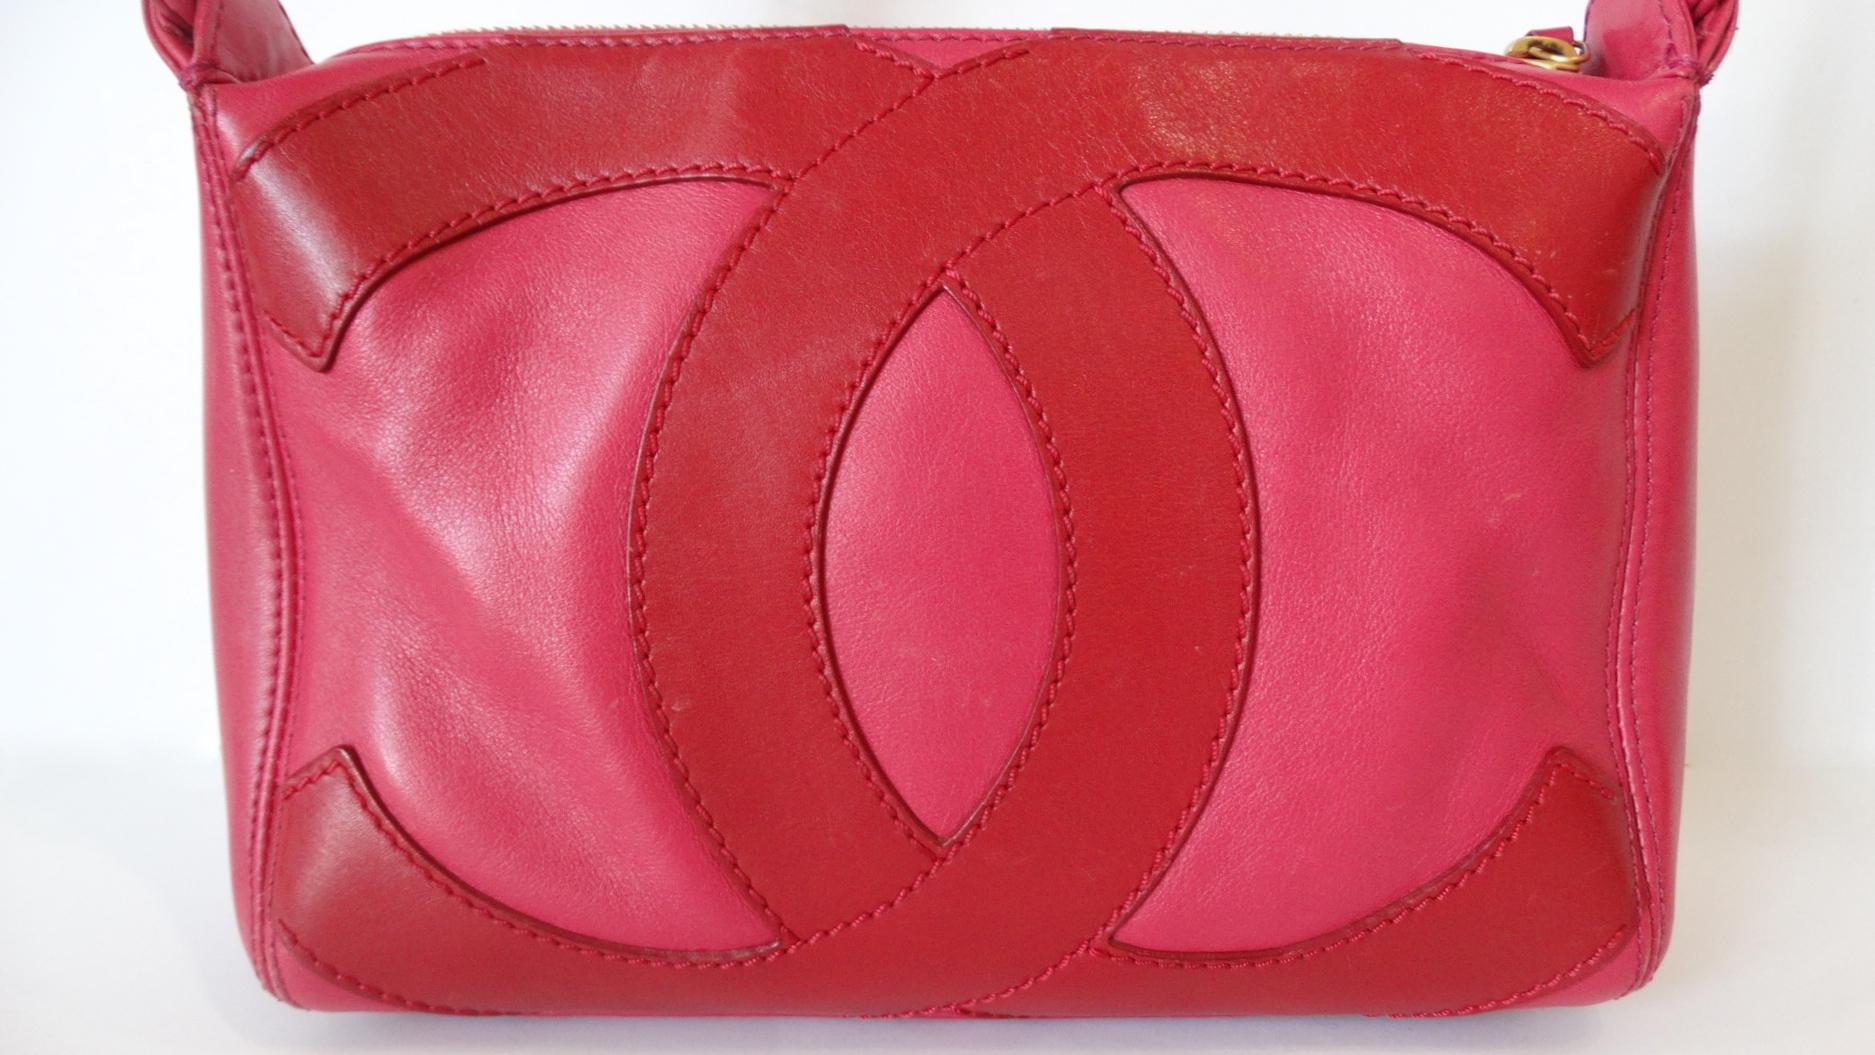 The Most Adorable 1990s Chanel Top Handle Bag Has Arrived! Made of a soft pink and lipstick red leather which feature the signature CC on the front and back. Open the zipper to find a lined interior decorated with the CC and Signed Chanel Made In